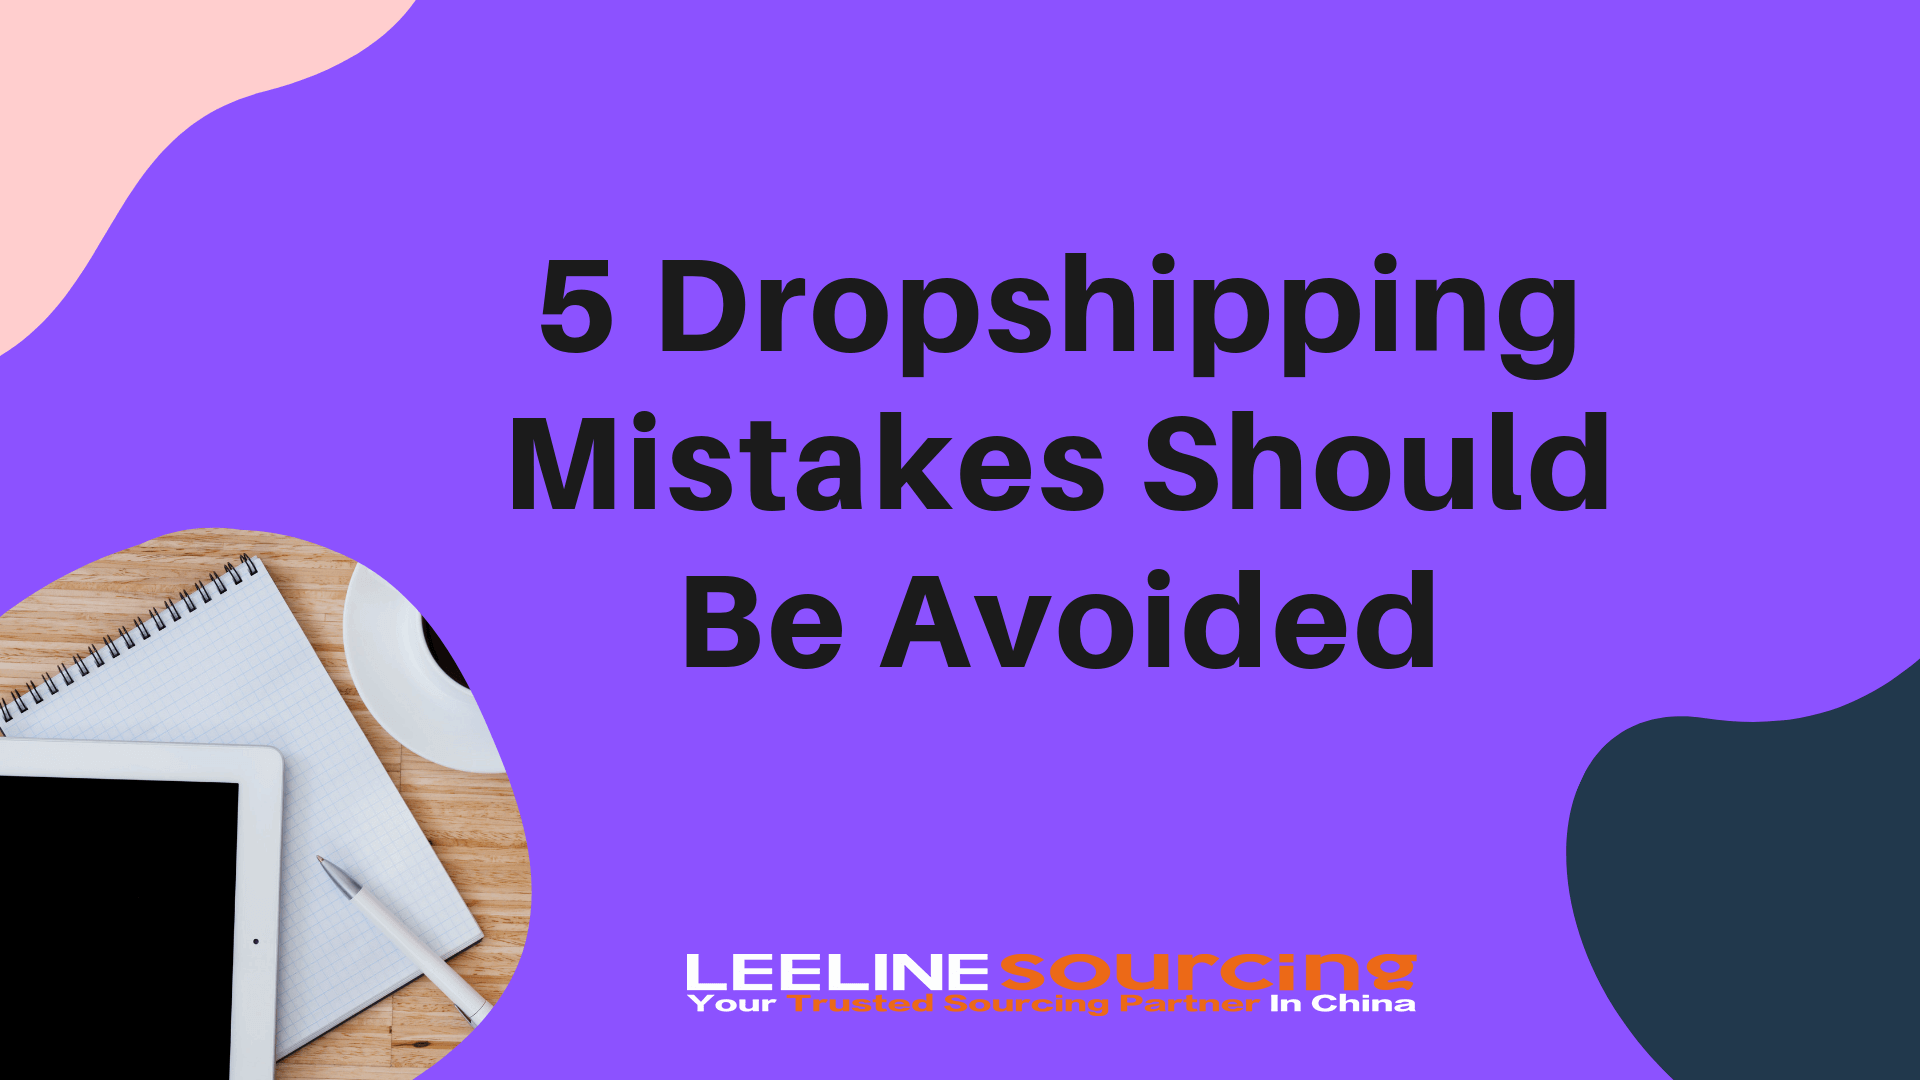 5 Dropshipping Mistakes Should Be Avoided